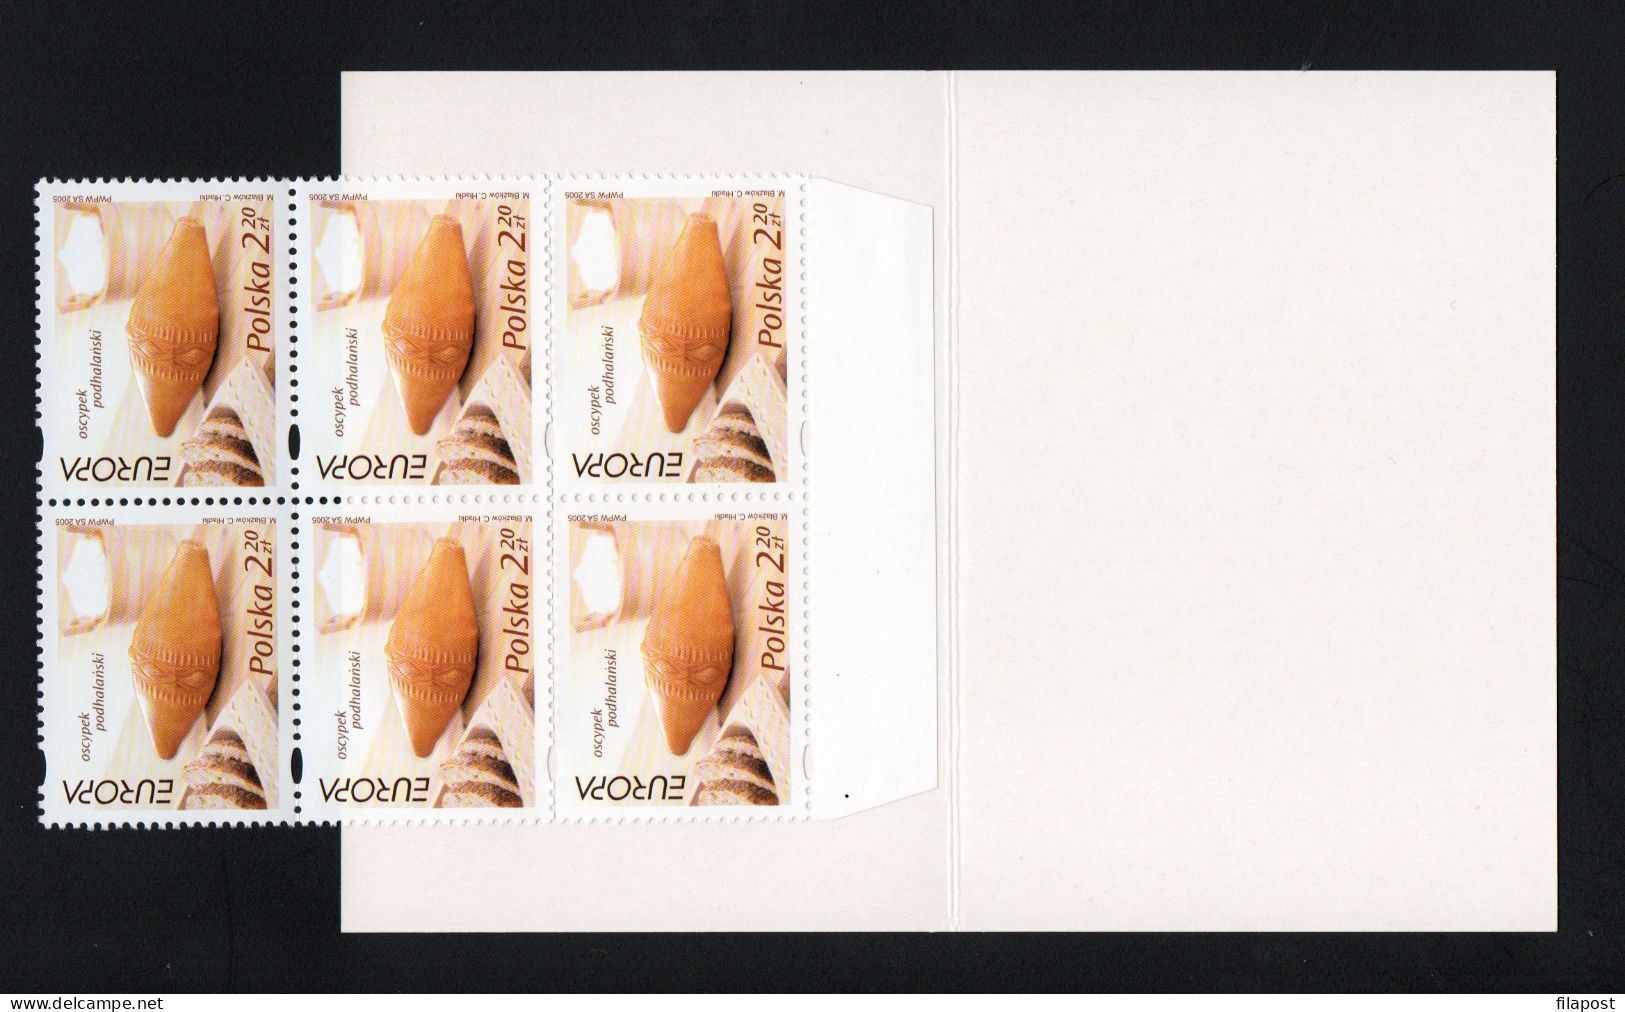 Poland 2005 Mi 4183 Europa - CEPT, Oscypek Cheese, Karpaty Mountain Traditional Food Booklet Set Of 6 Stamps MNH** - Cuadernillos